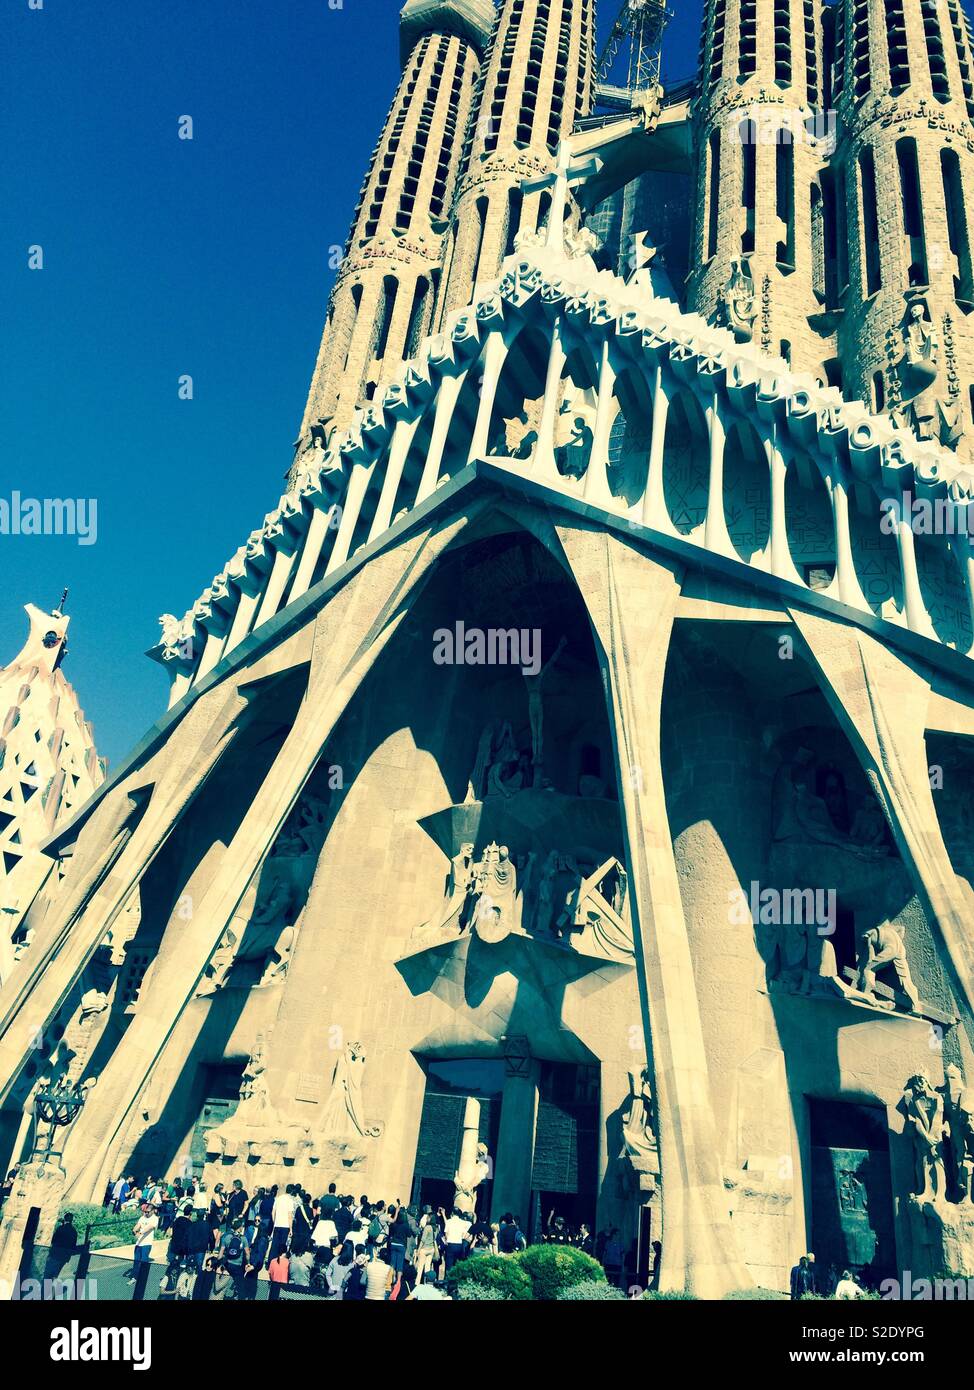 Portrait of Sagrada Familia Basilica with queuing tourists waiting to get inside in Barcelona Spain Stock Photo